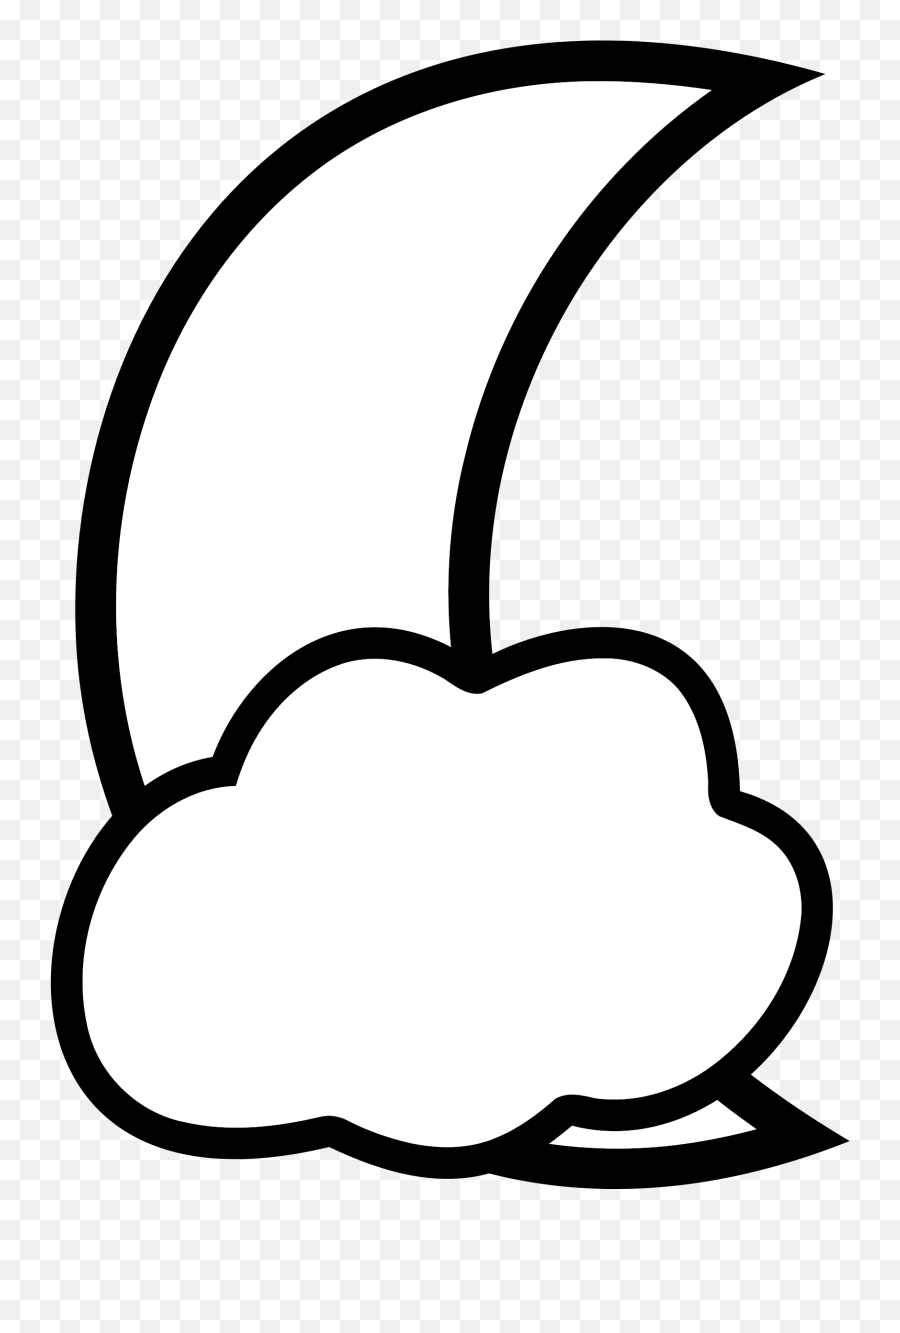 This Free Icons Png Design Of Cloud Covered Moon Outline Emoji,Cloud And Moon Emoji